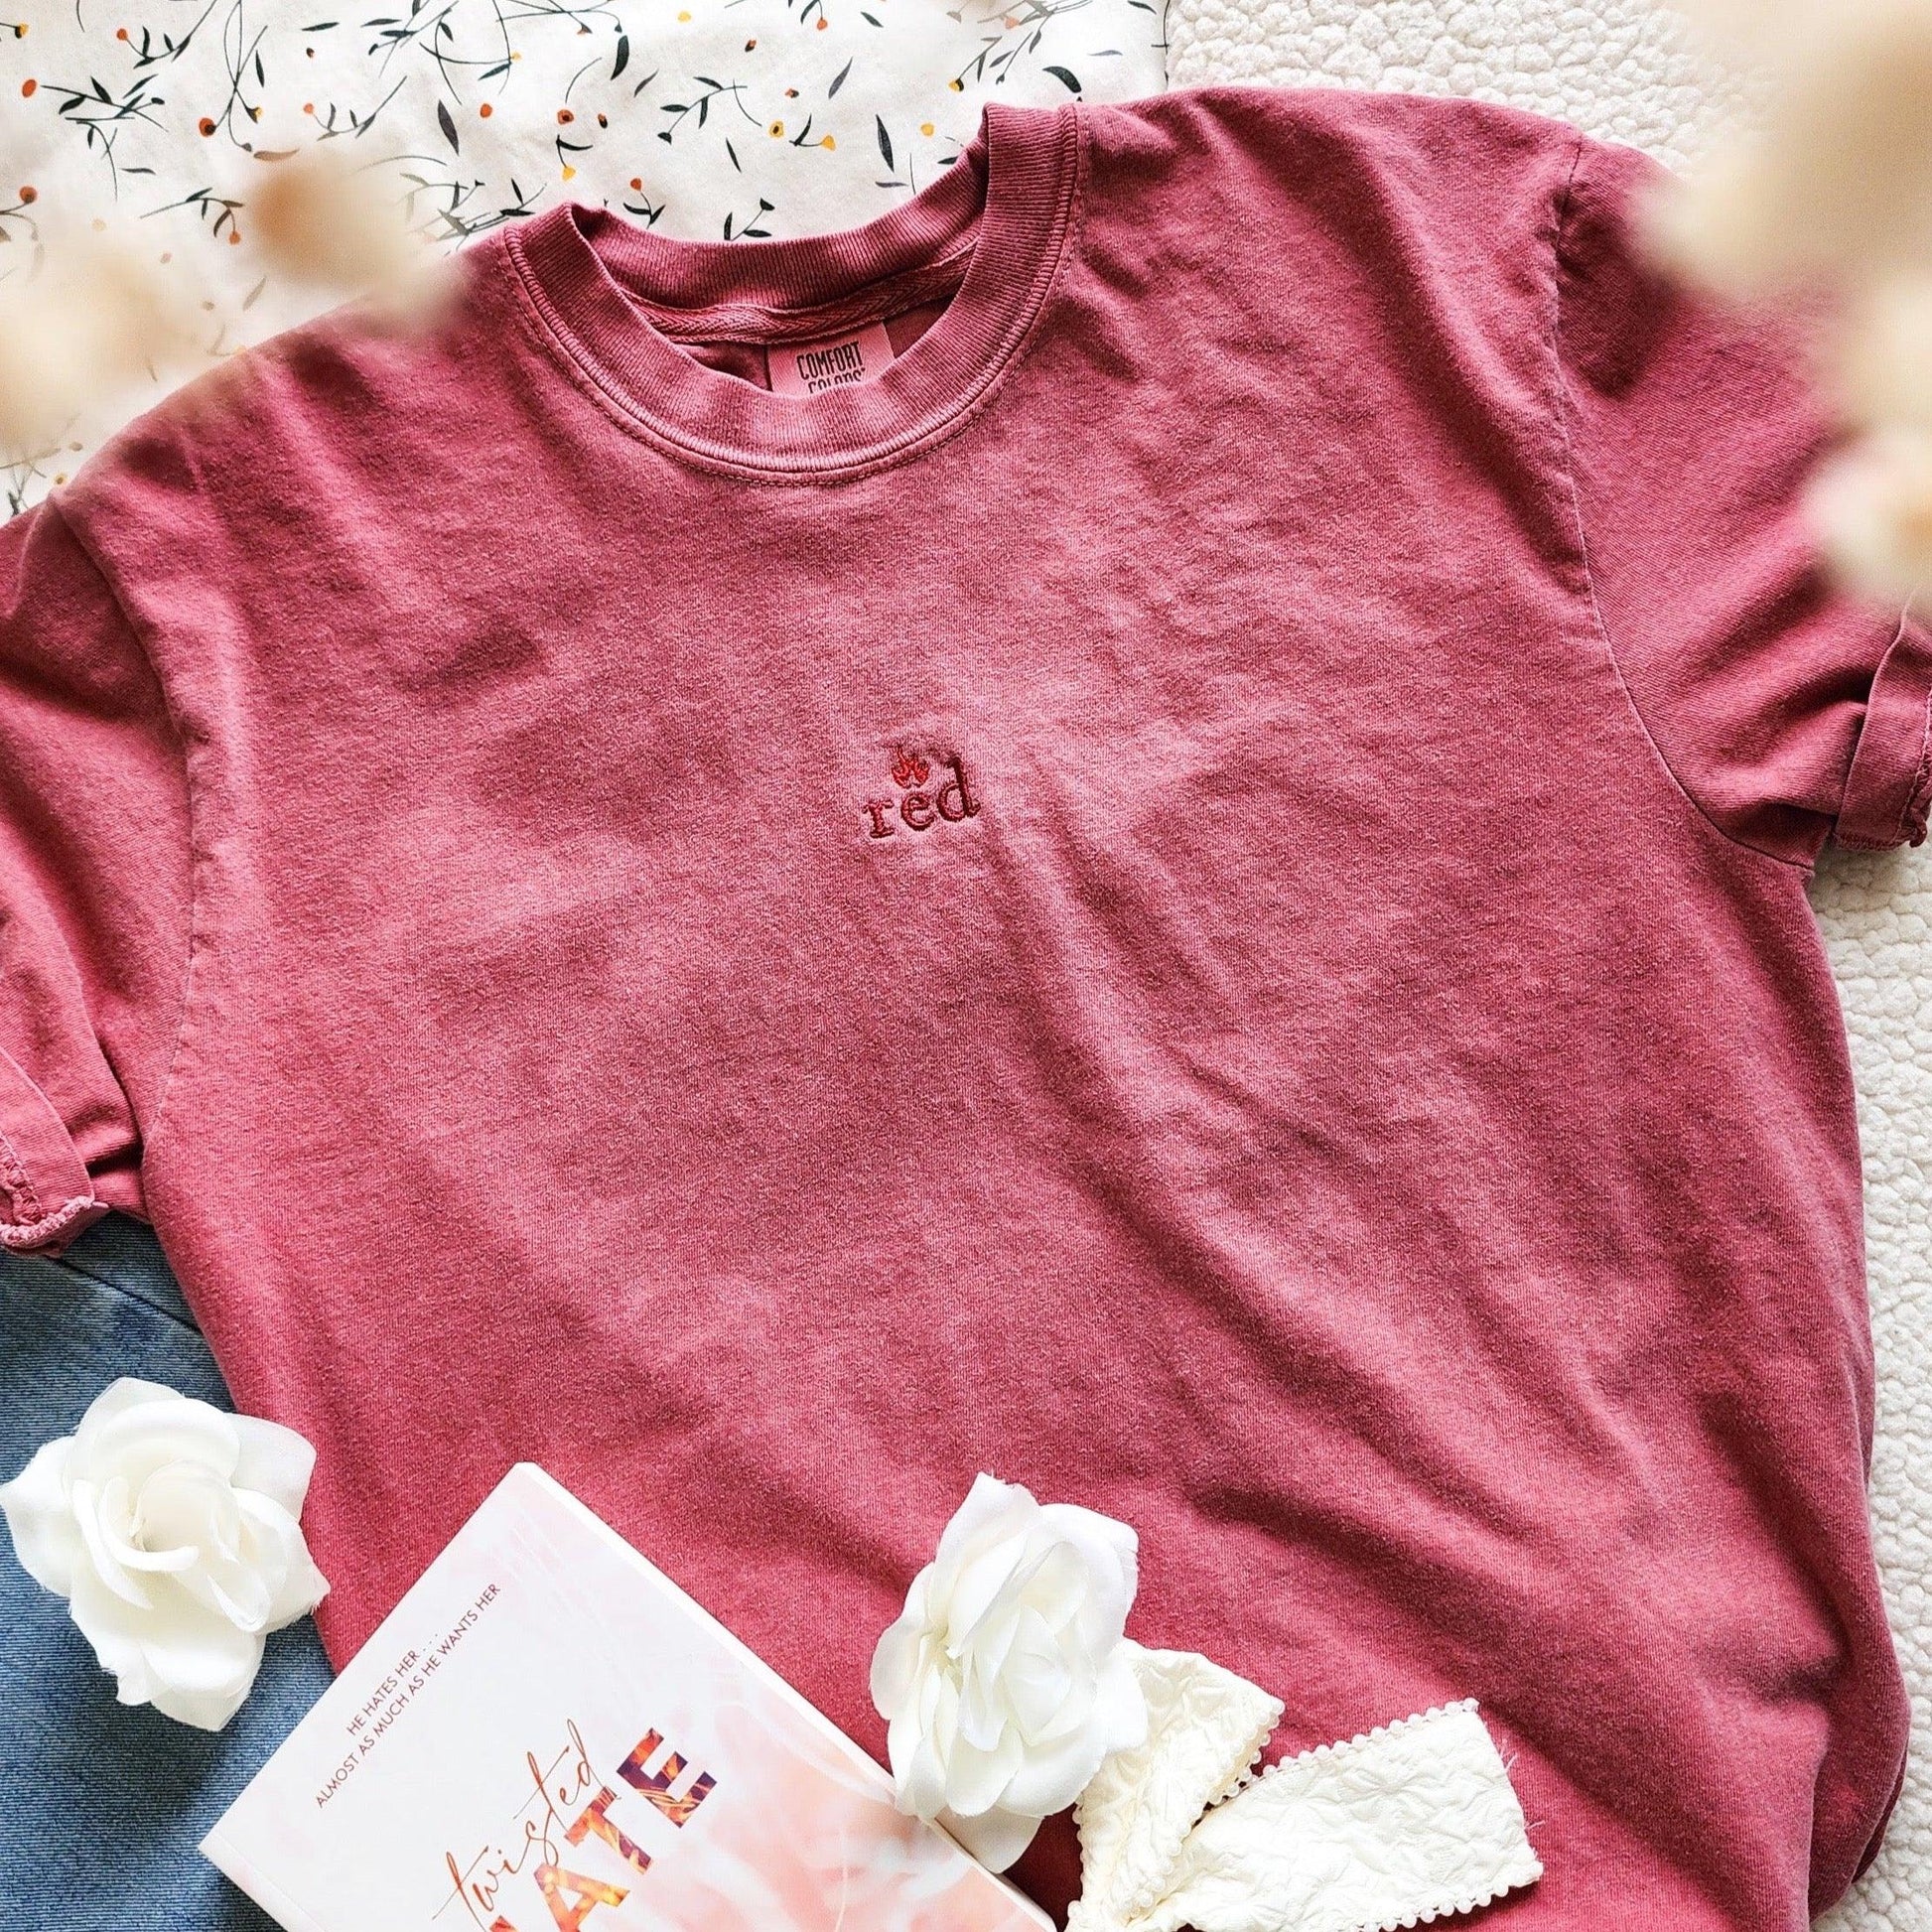 Red Embroidered T-Shirt - The Bean Workshop - ana huang, box tee, embroidered, twisted